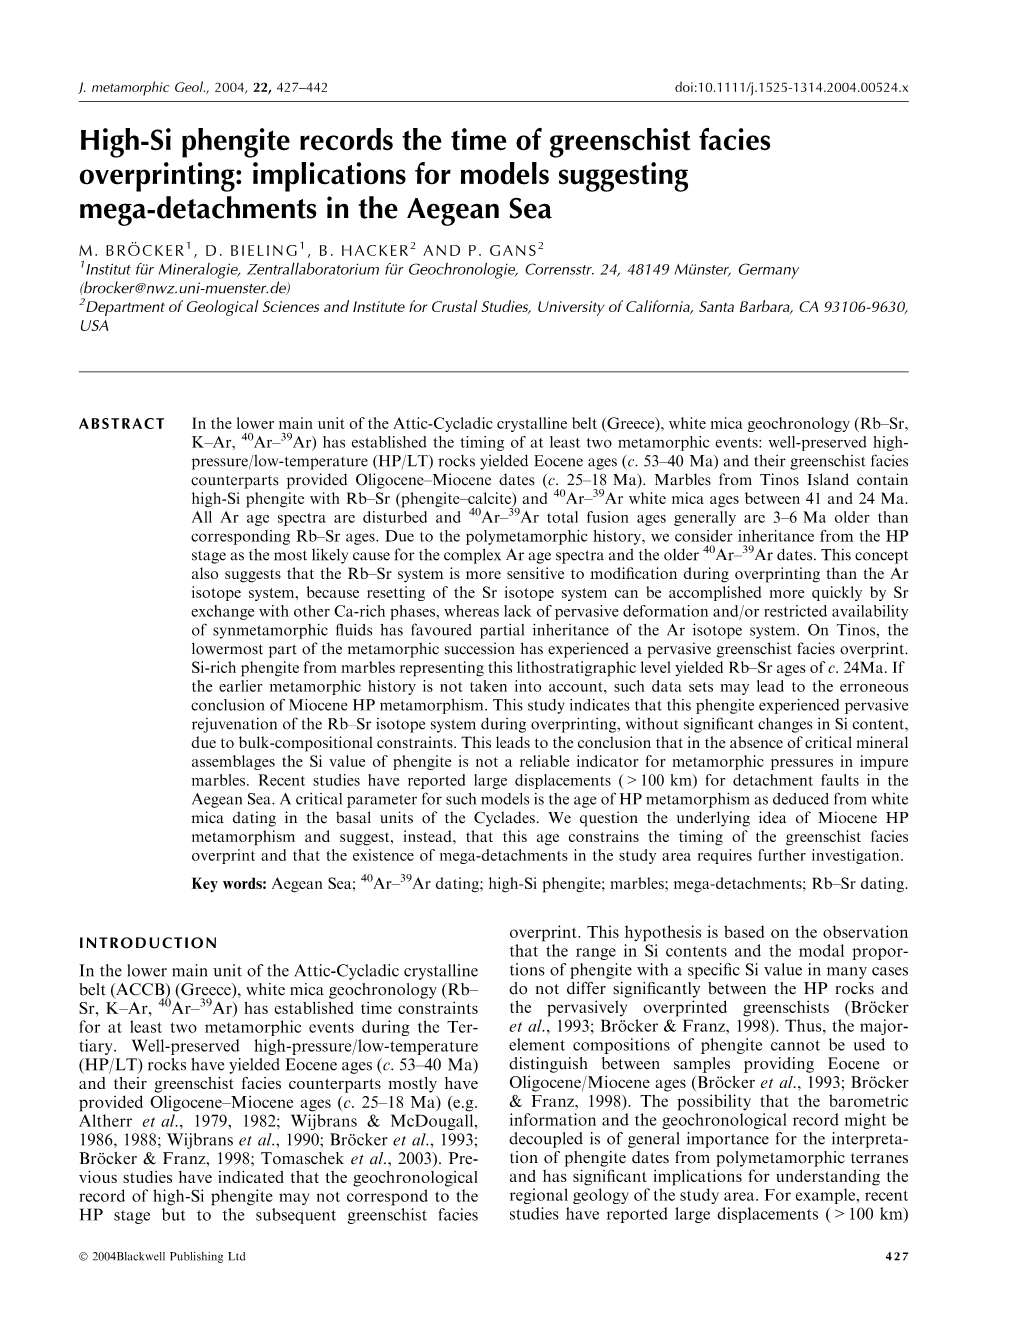 High-Si Phengite Records the Time of Greenschist Facies Overprinting: Implications for Models Suggesting Mega-Detachments in the Aegean Sea